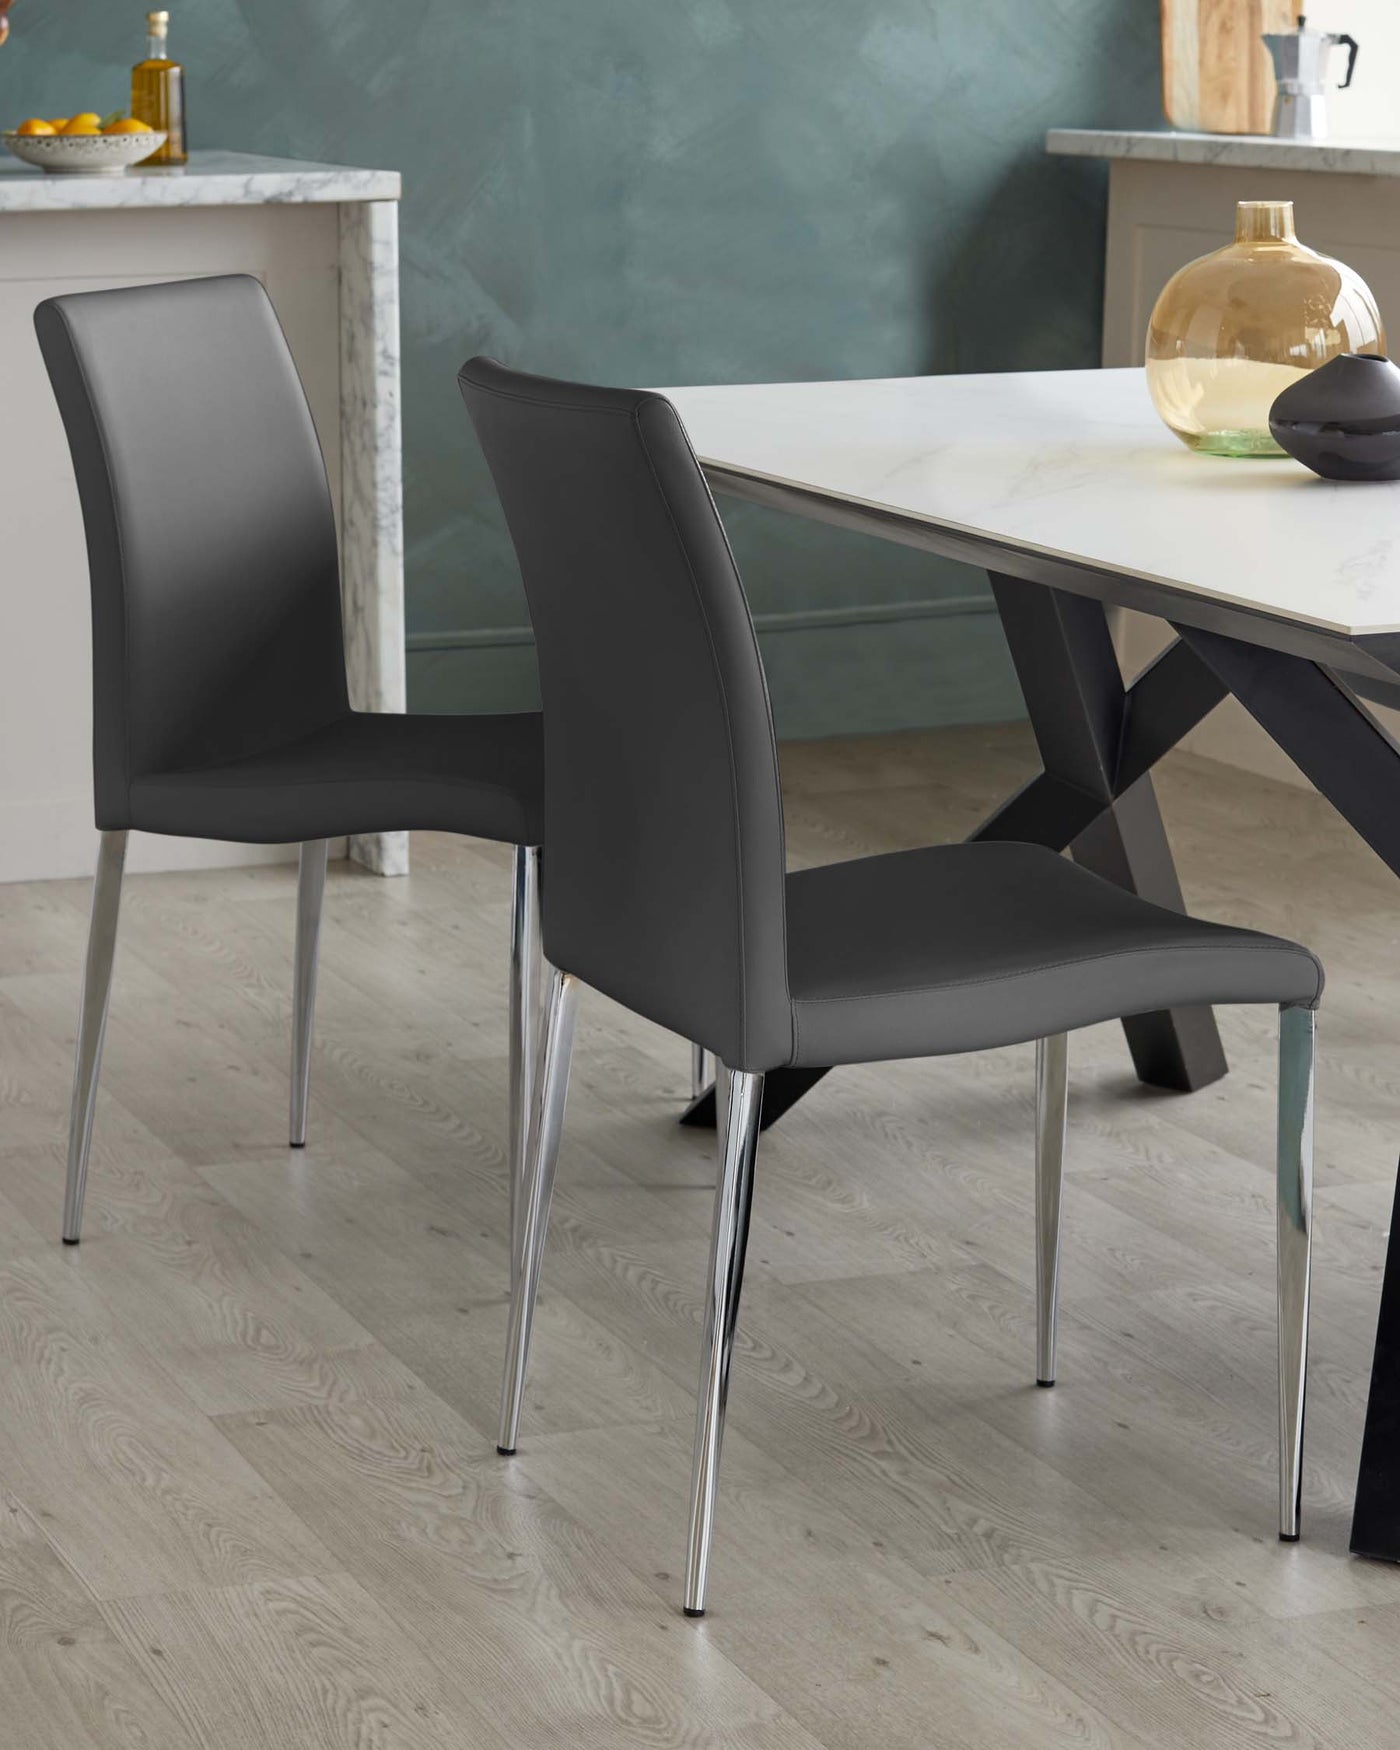 Modern dining furniture set featuring a white marble table with a distinctive black angular base, paired with sleek black upholstered chairs that have chrome-finished metal legs.